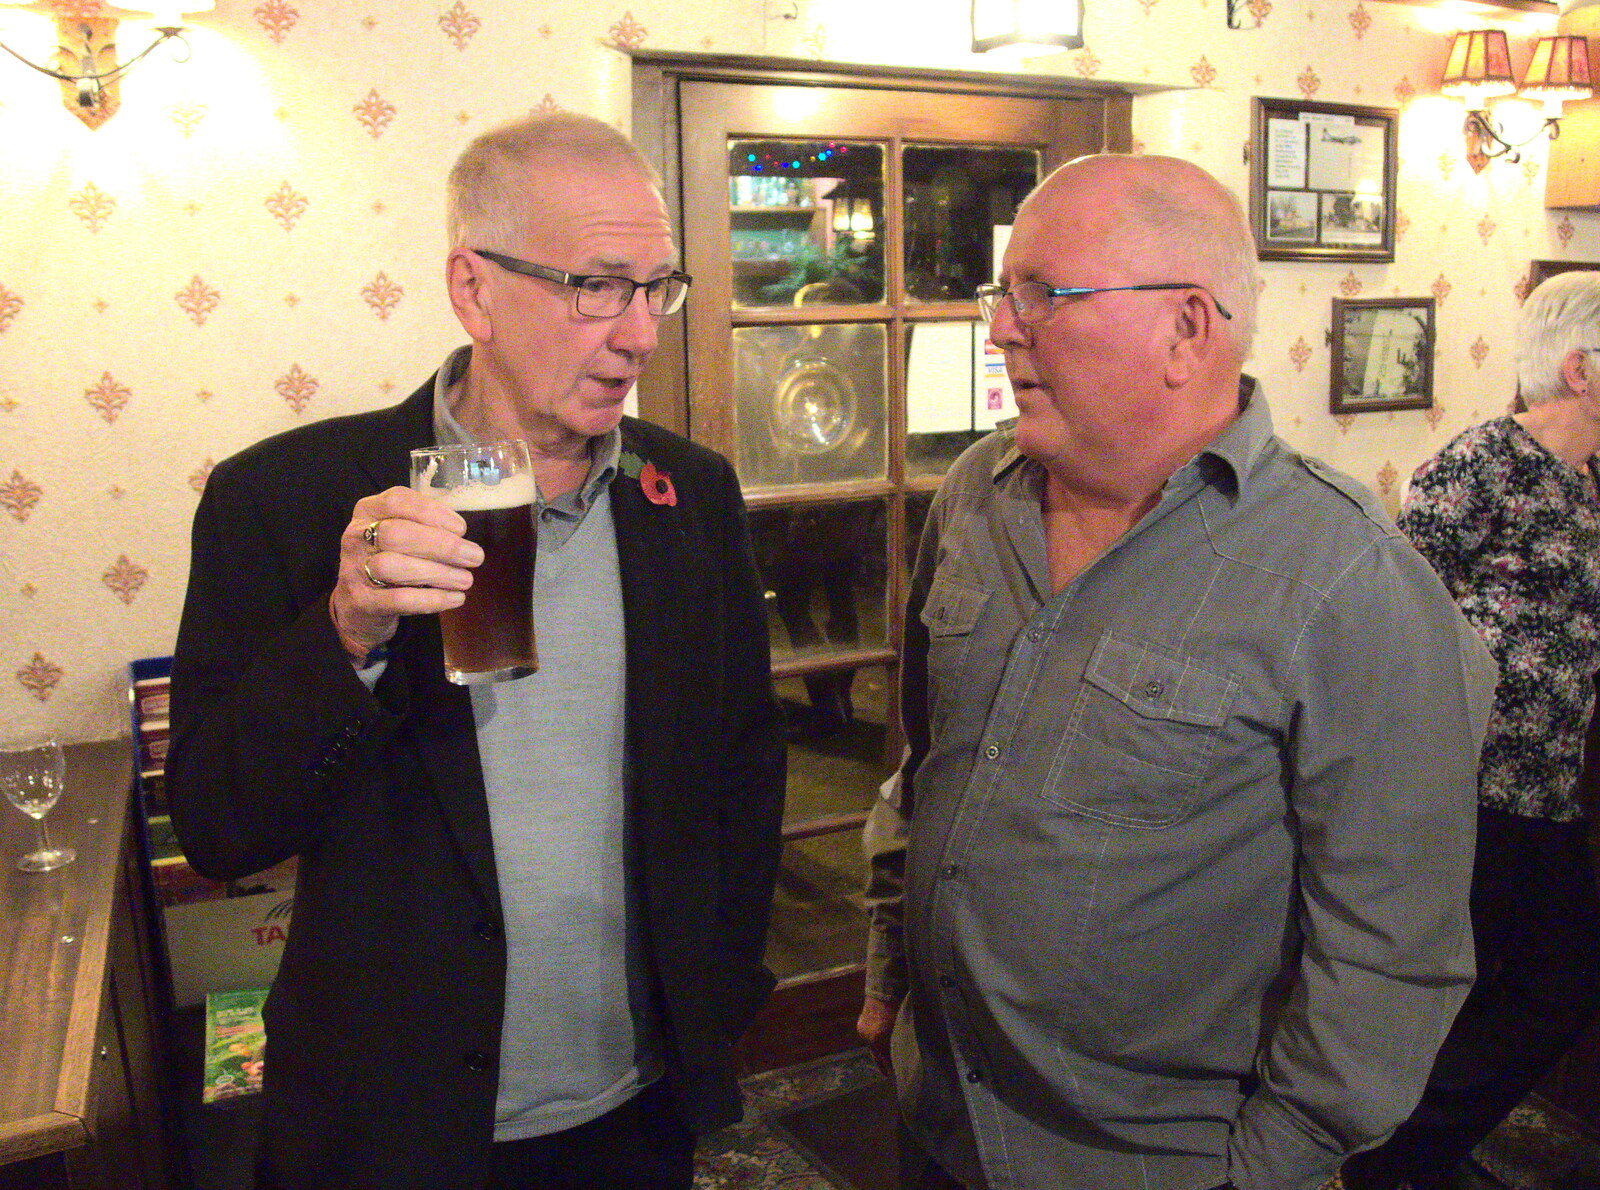 John Willy holds a beer from John Willy's 65th and Other Stories, The Swan, Brome, Suffolk - 31st October 2015